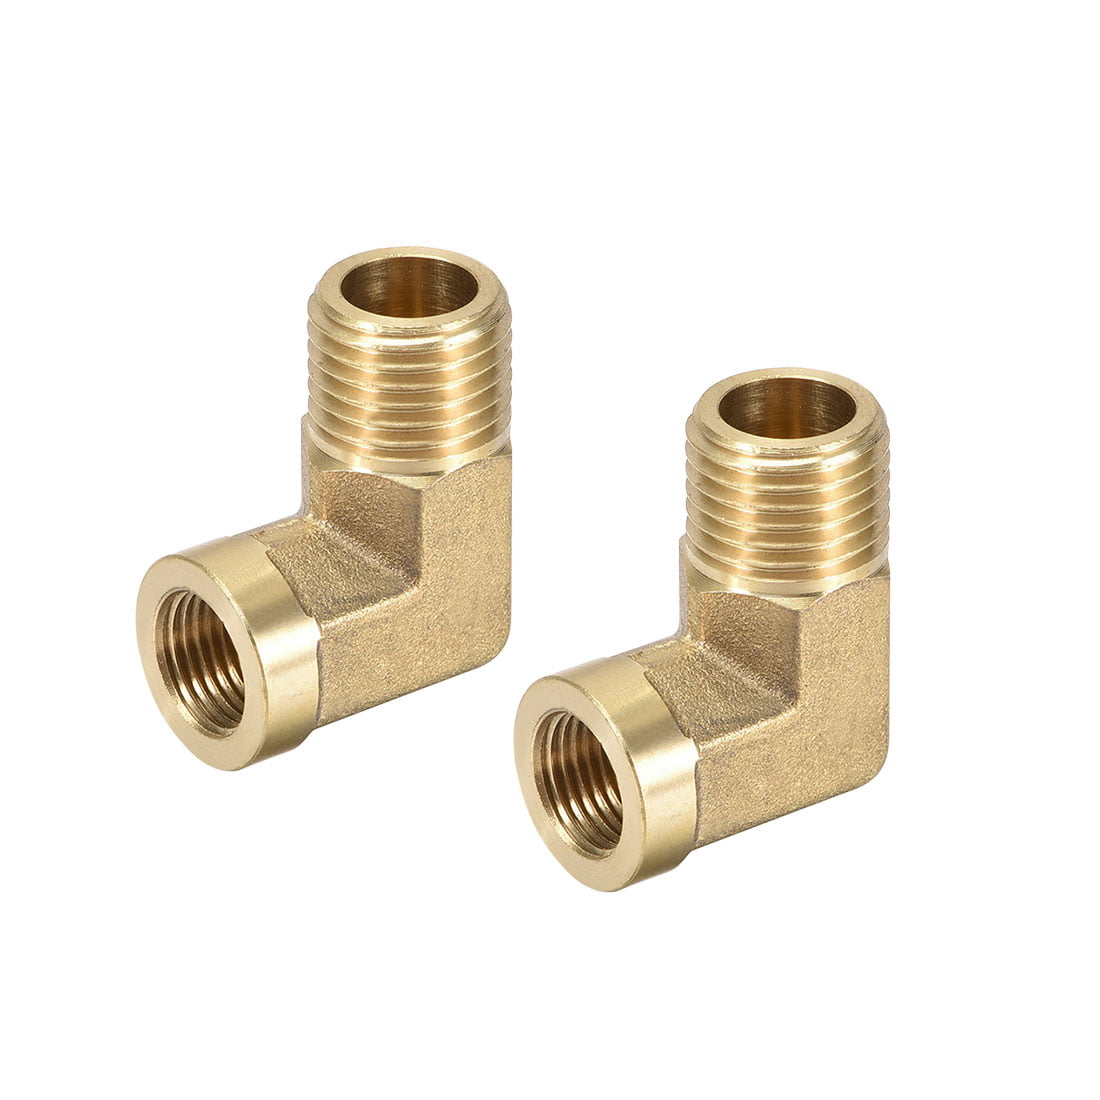 Brass Pipe Fitting 90 Degree Elbow G1/8 Male x G1/8 Female 